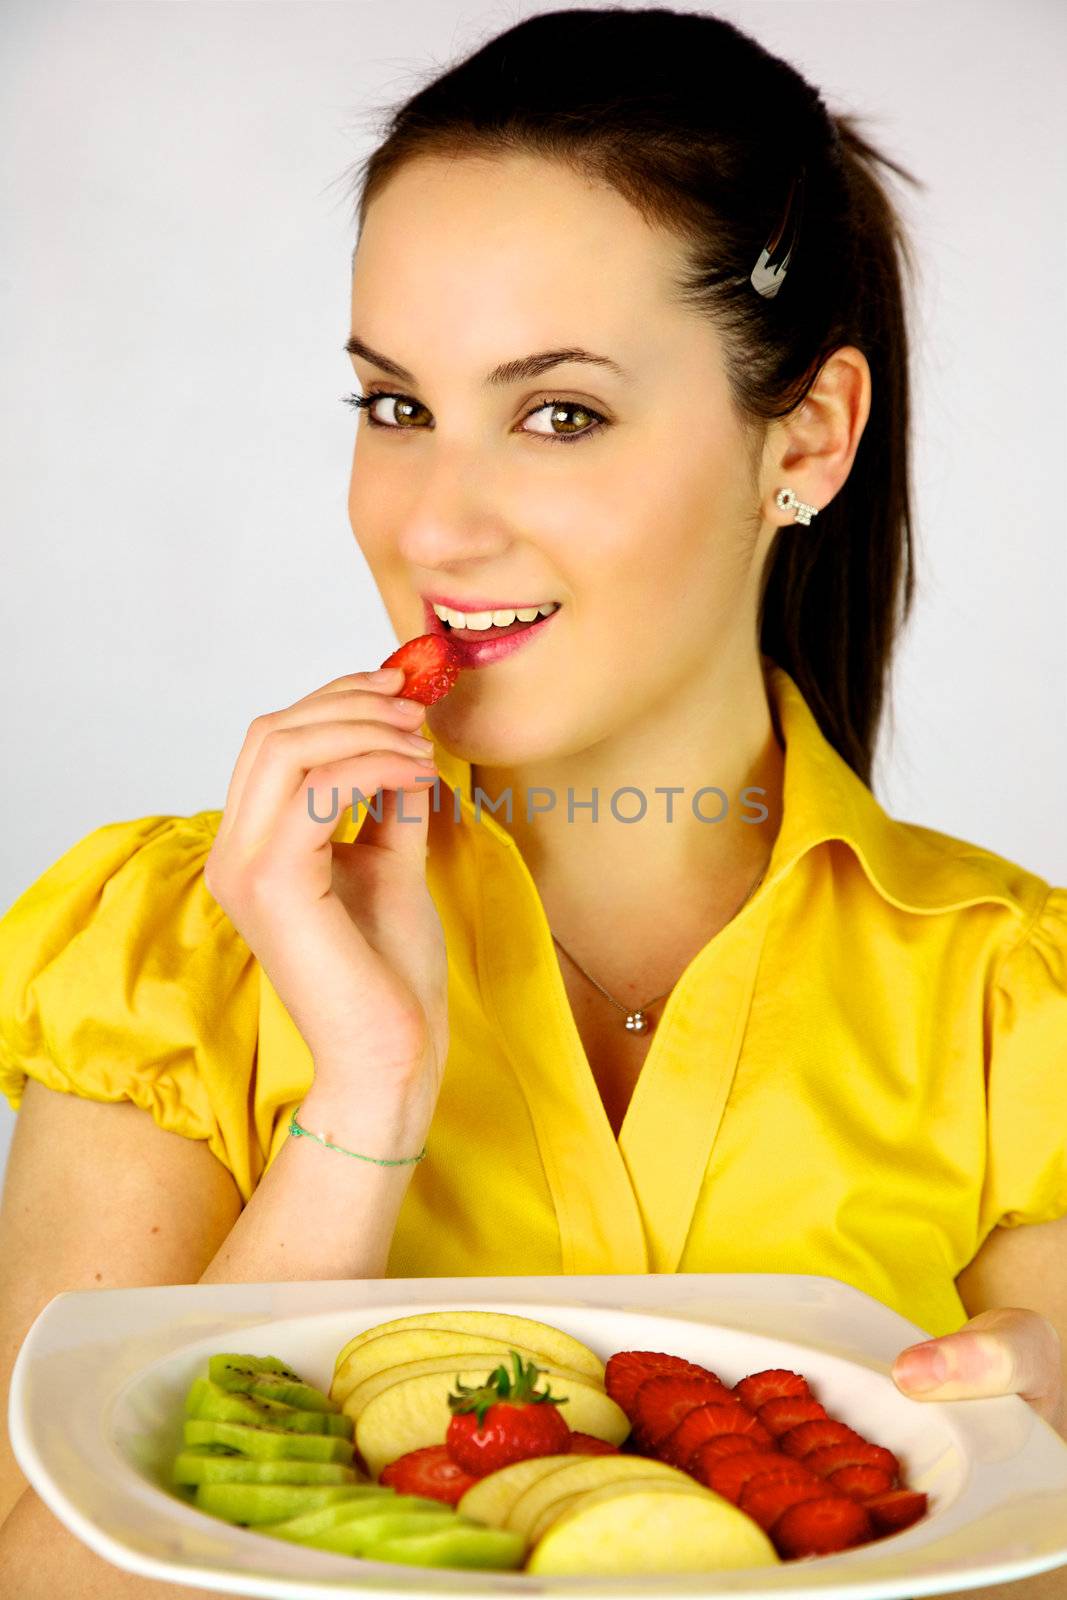 Female model with plate with fruit eating strawberry by fmarsicano